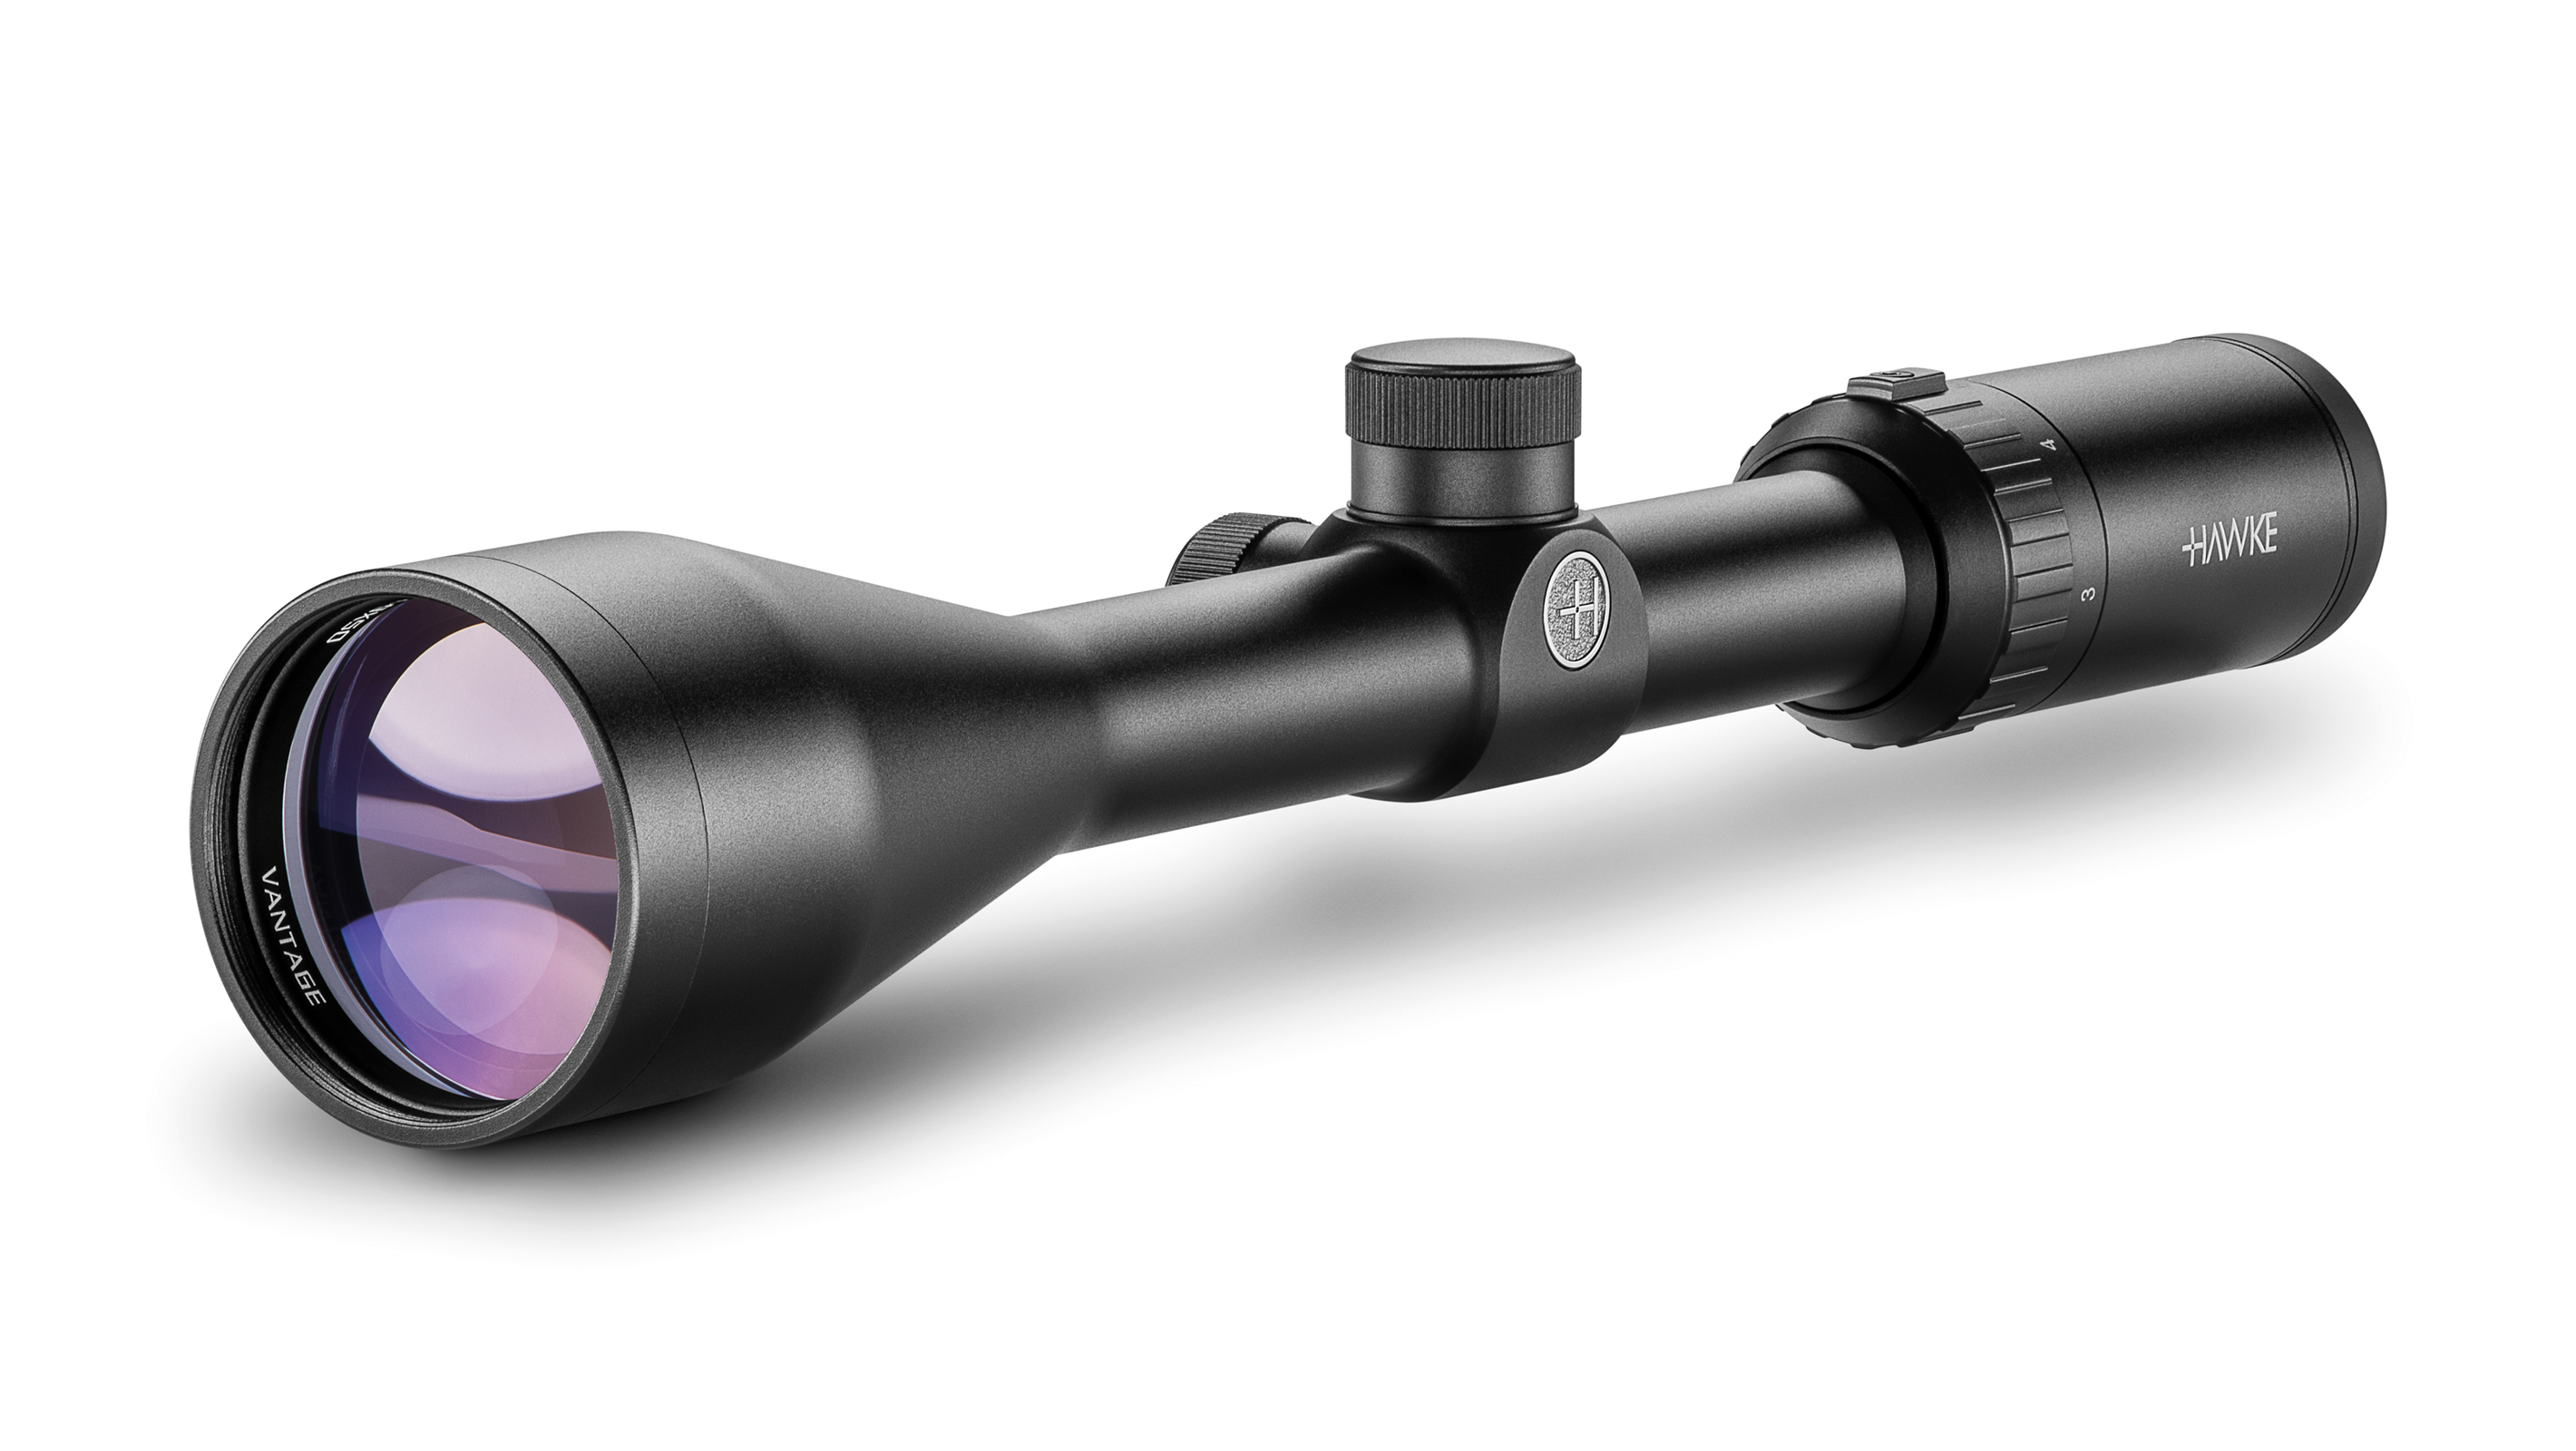 Objective End View Of The Hawke Vantage 3-9x50 30/30 Duplex Rifle Scope